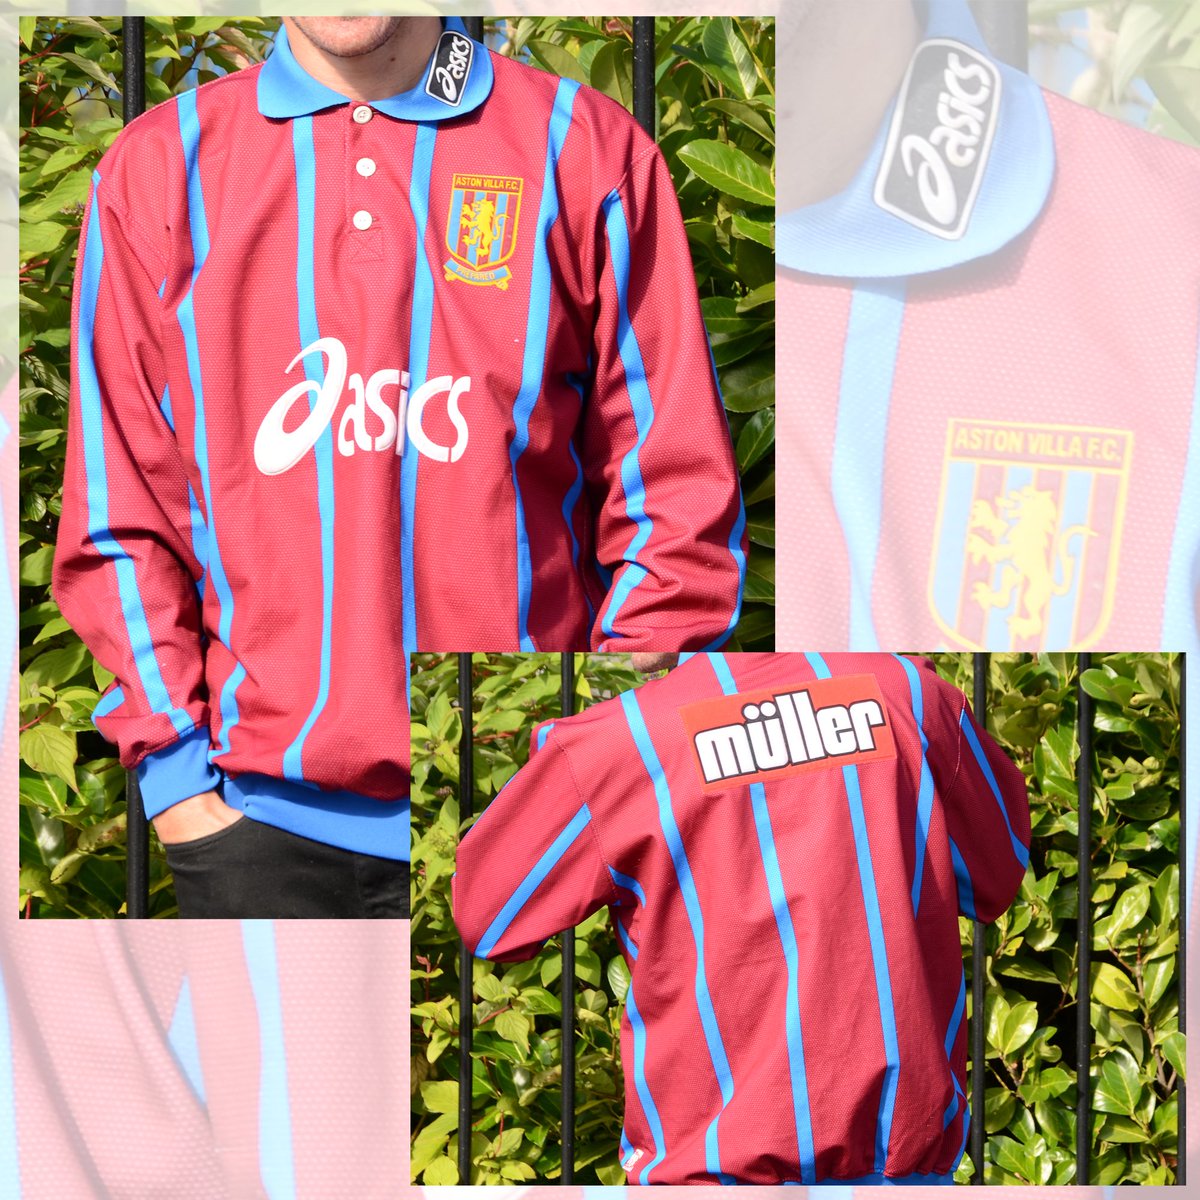 Classic Football Shirts on Twitter: Villa 1993-94 Player Asics Drill Top RT if had a drill-top growing up? https://t.co/5mz99cW2m8" / Twitter